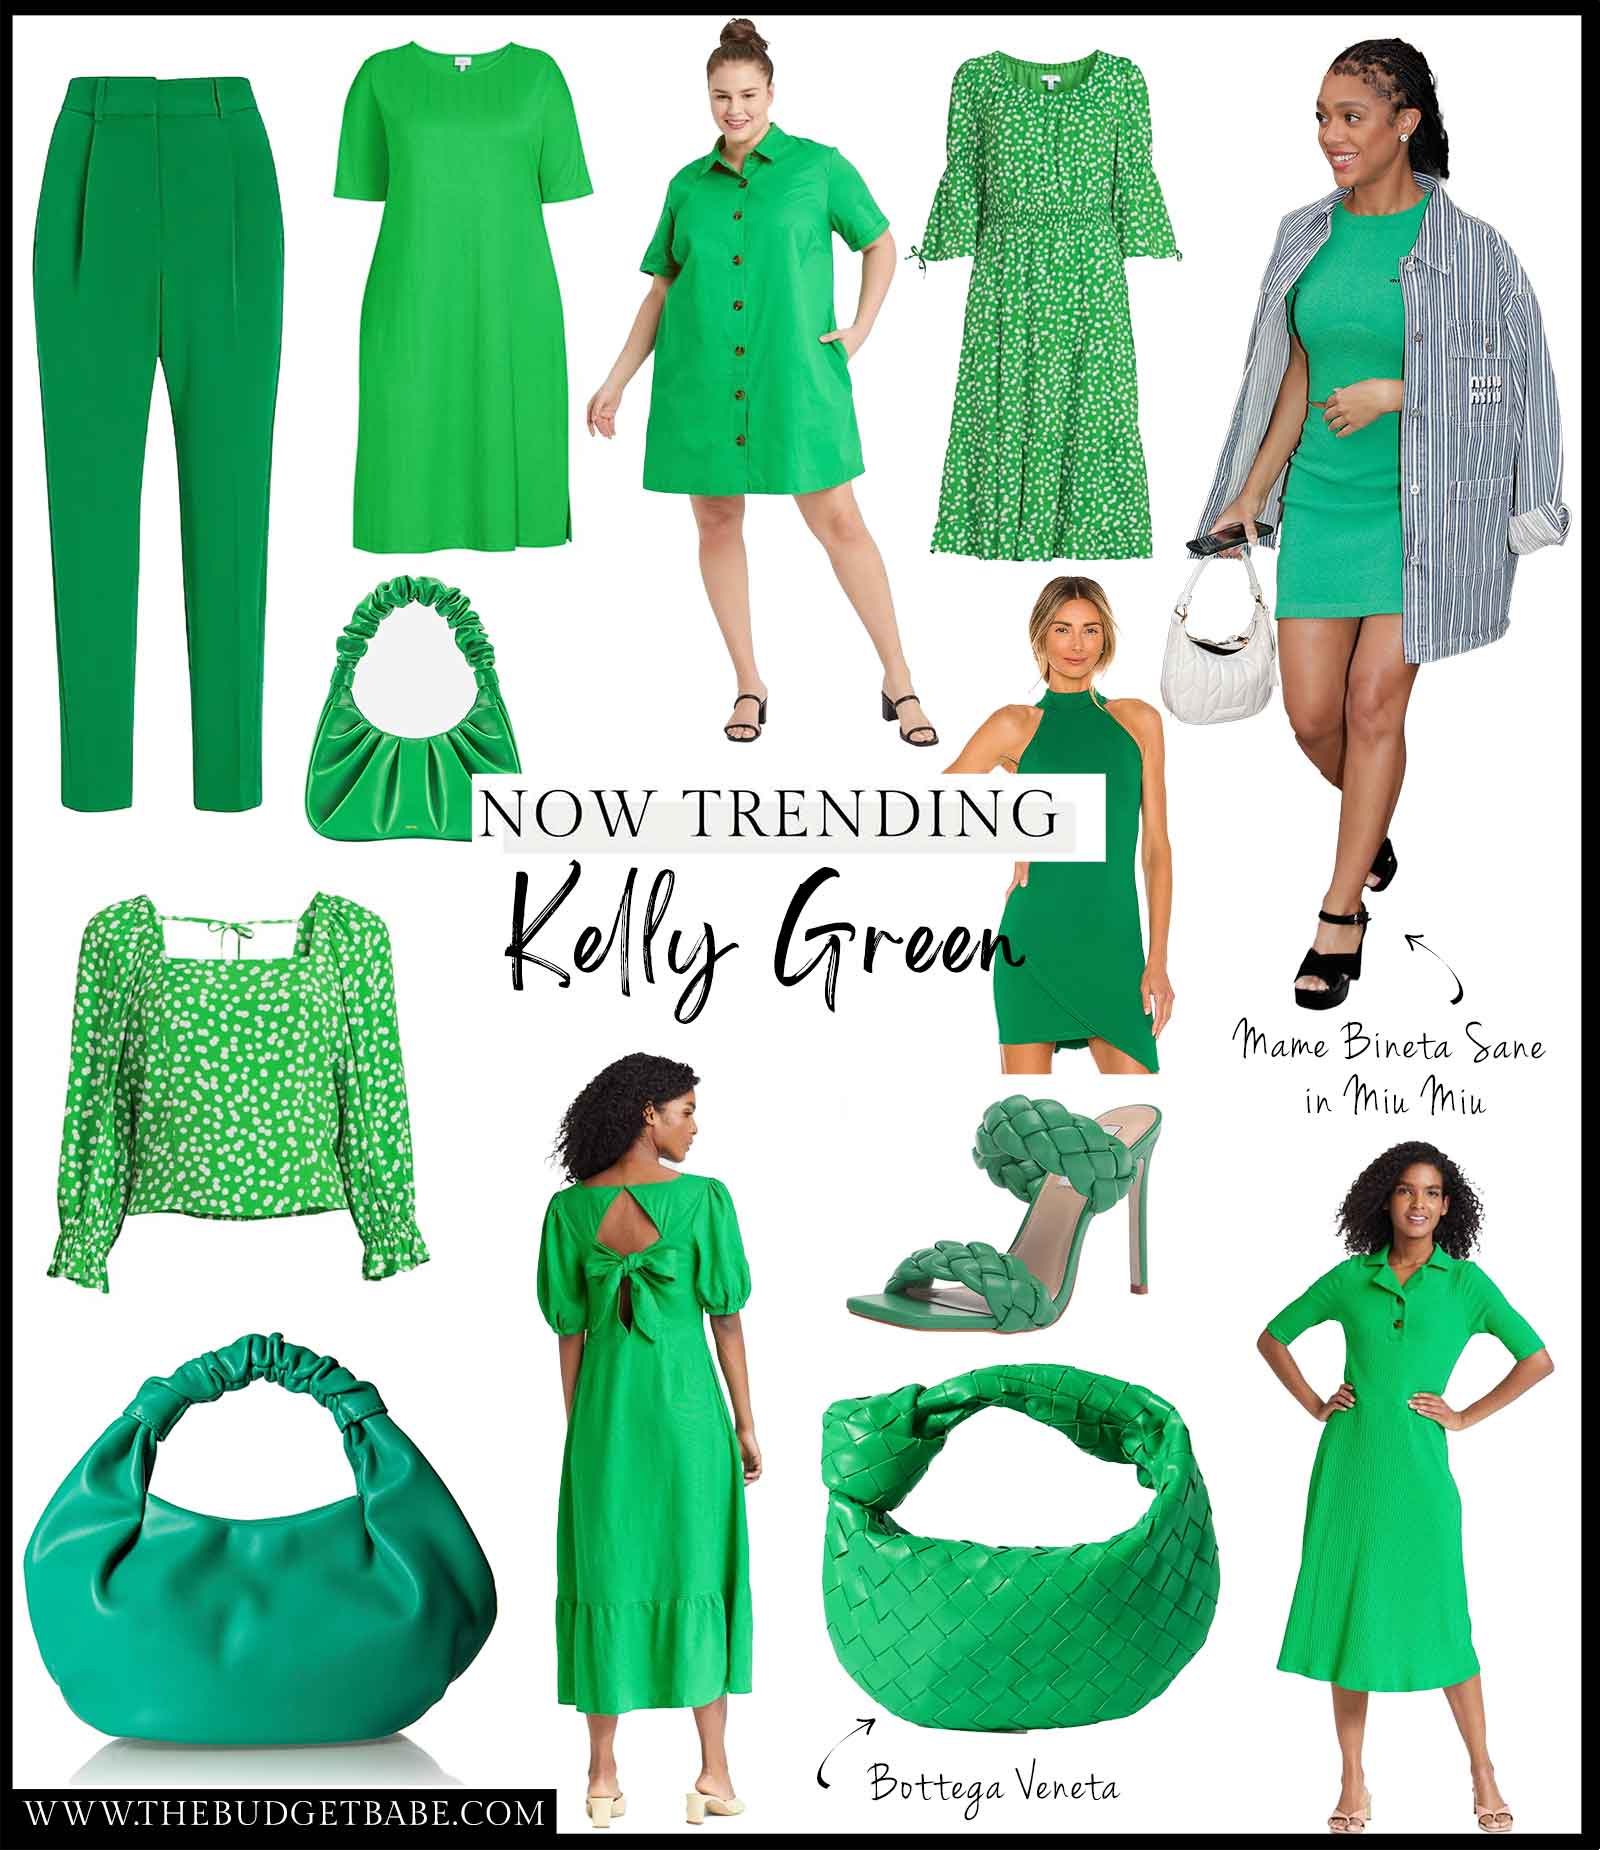 Kelly green is trending for spring fashion 2022